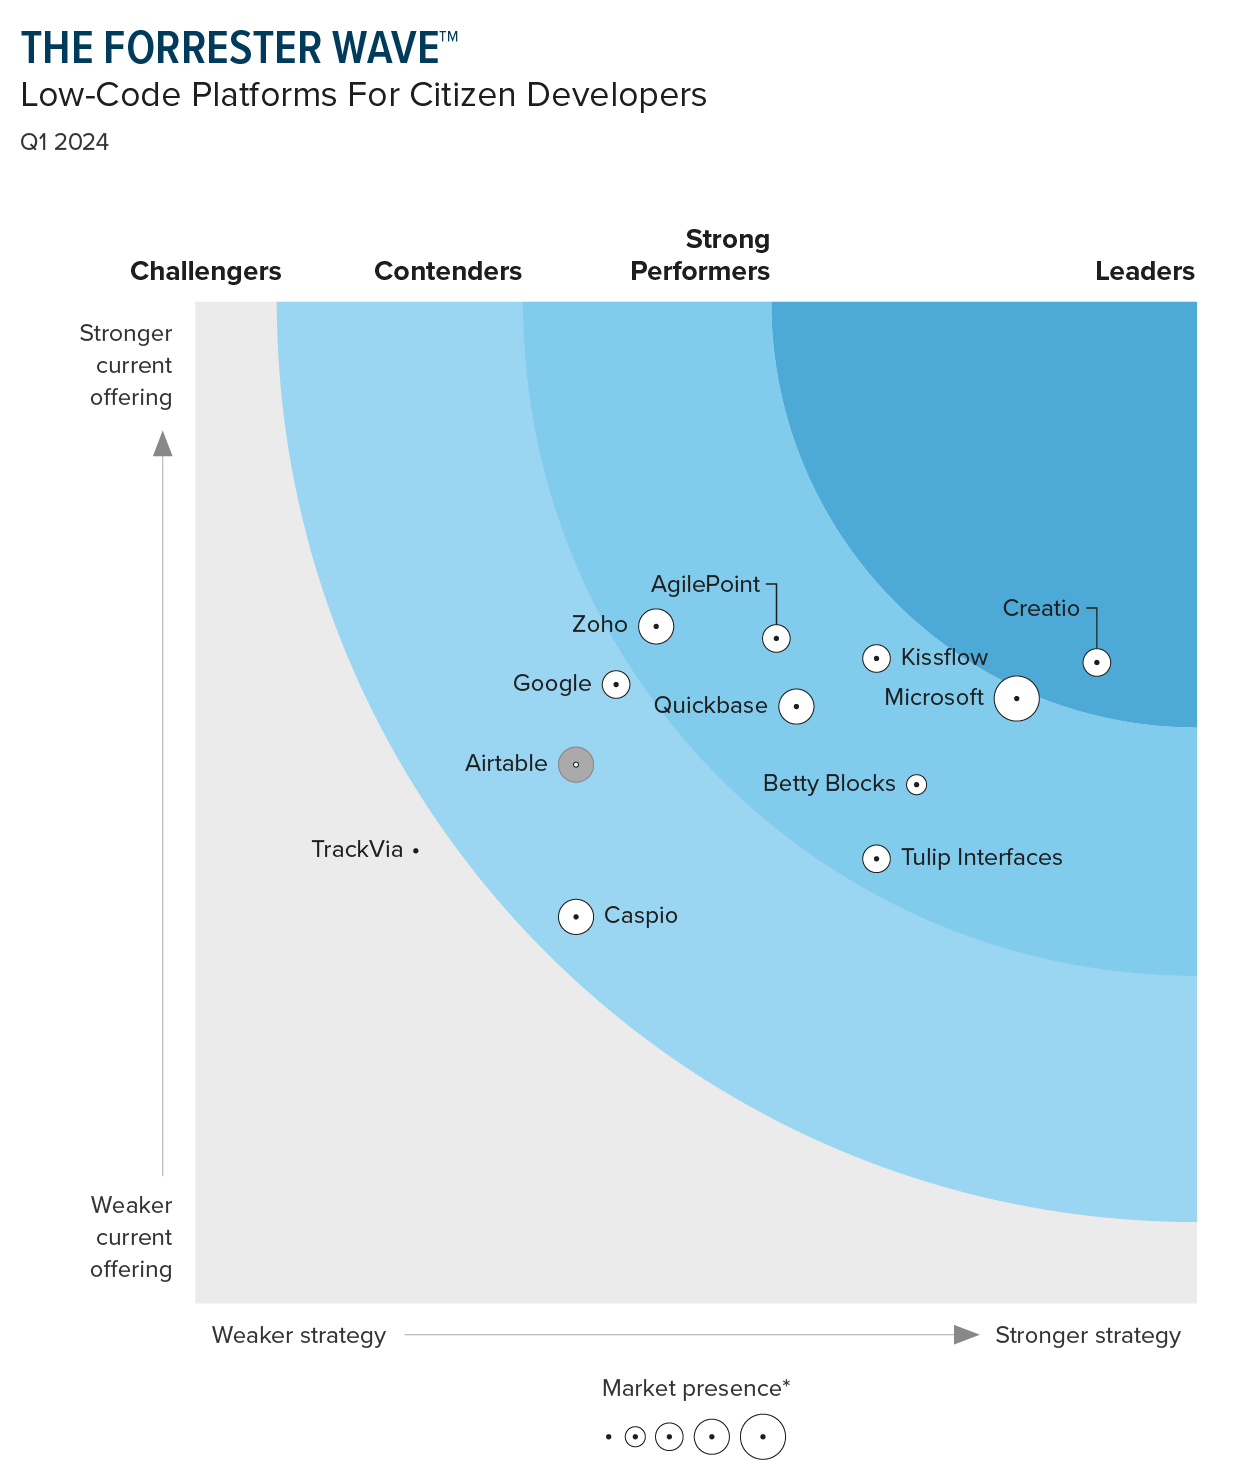 Kissflow named as a Strong Performer in The Forrester Wave™: Low-Code Platforms For Citizen Developers, Q1 2024